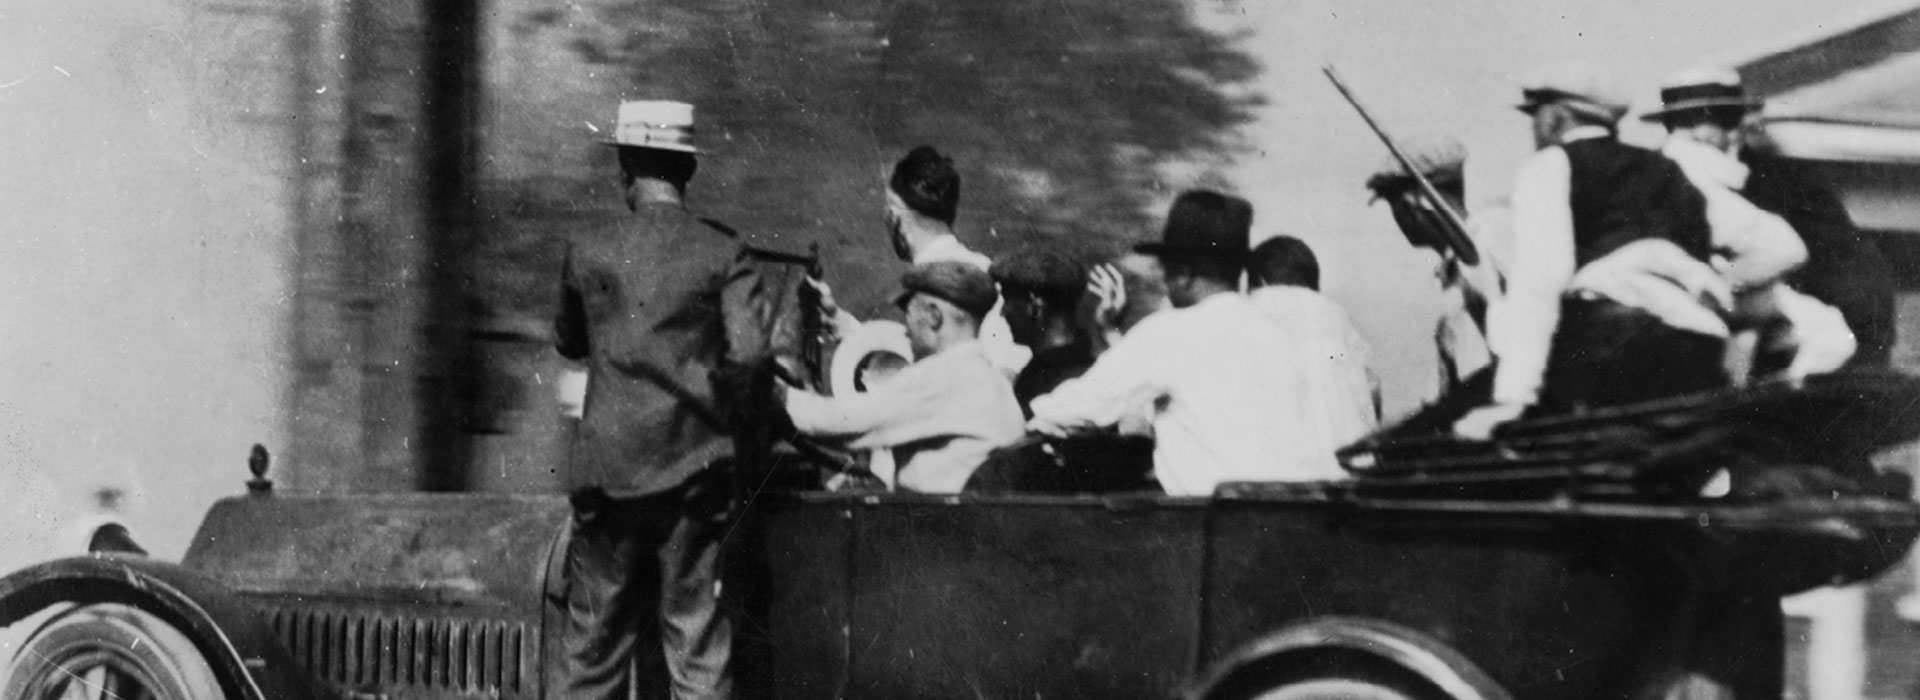 Armed white rioters during the 1921 Tulsa Race Massacre.